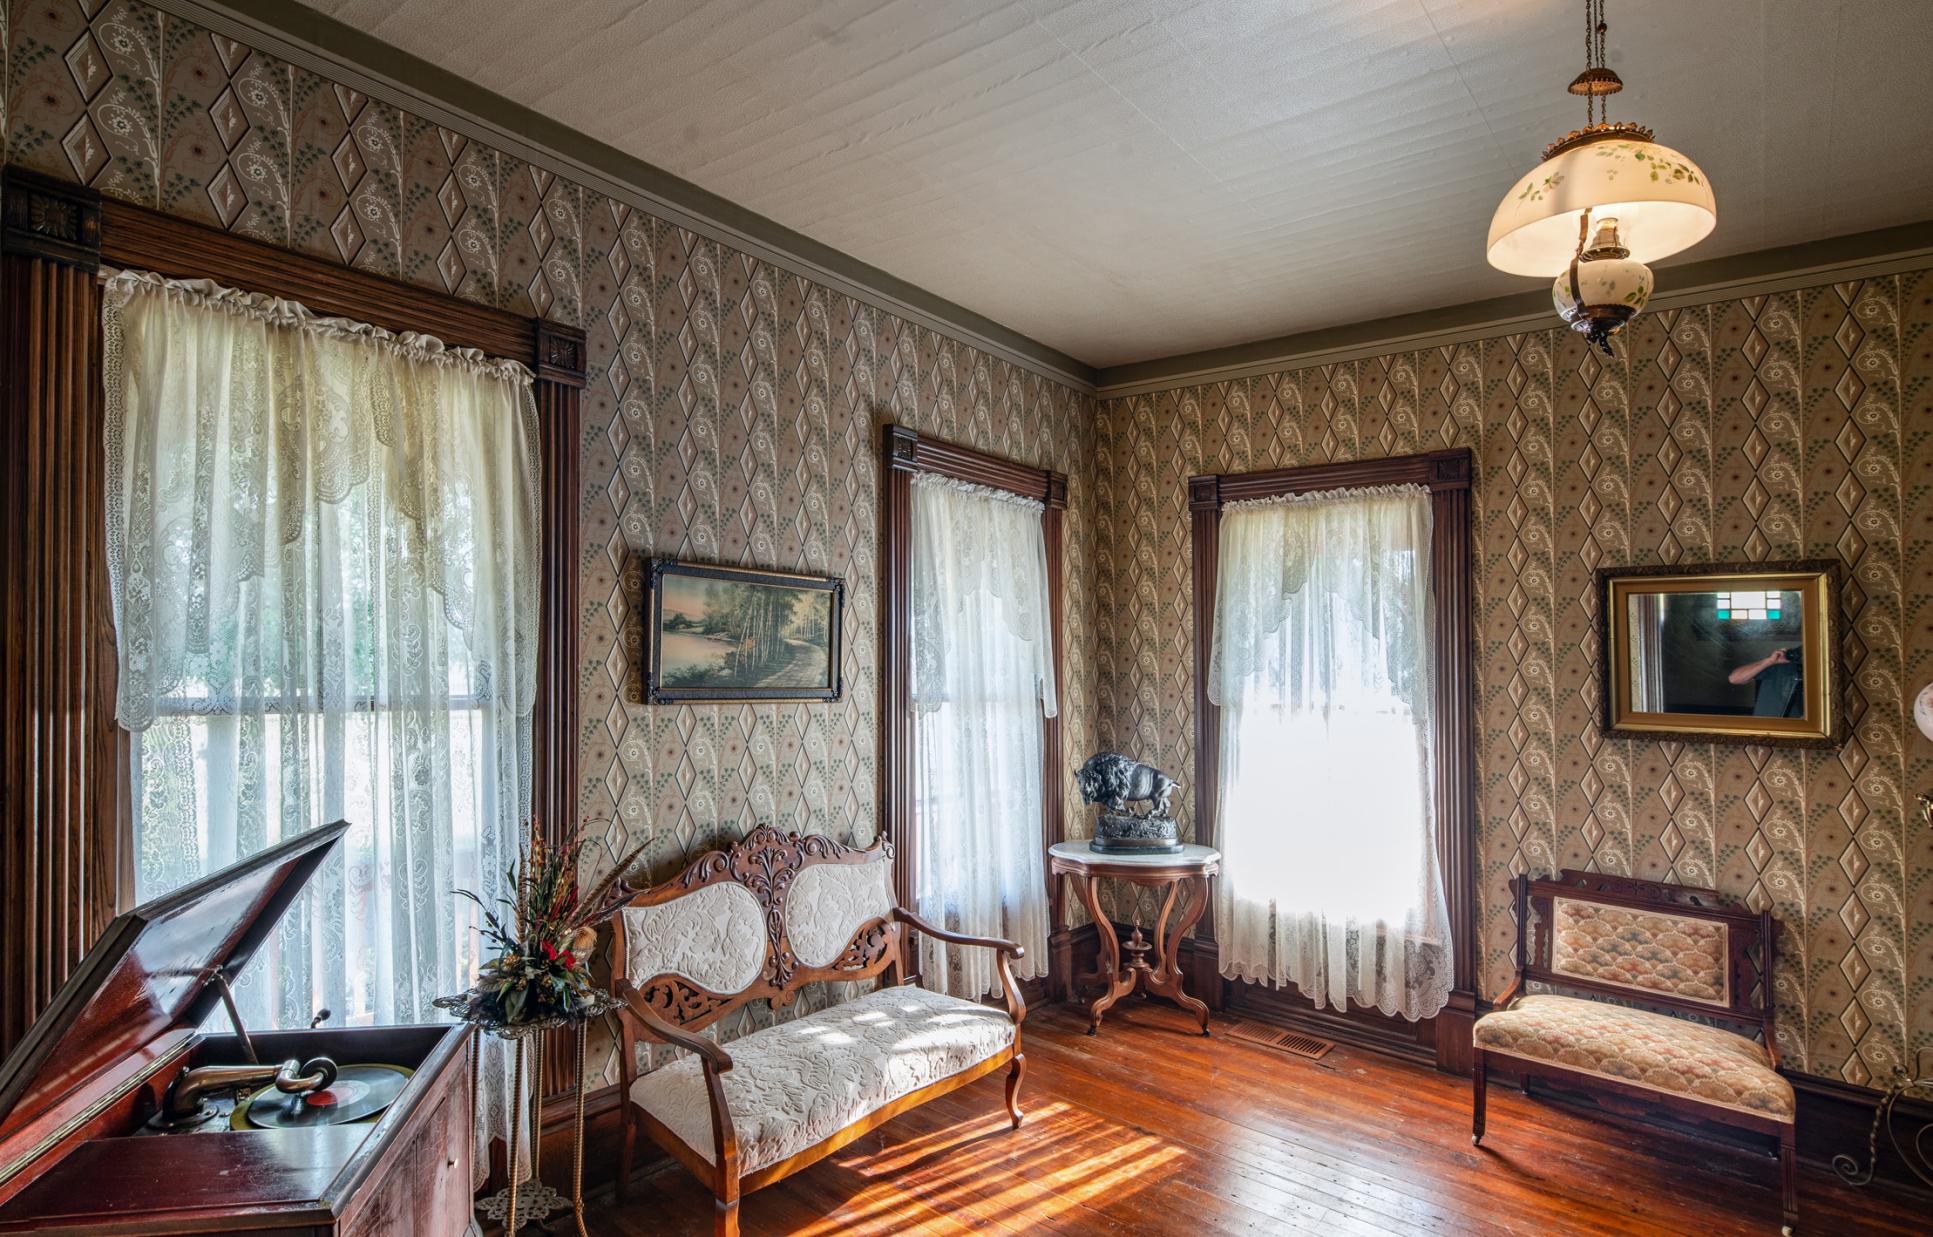 Parlor of the main ranch house